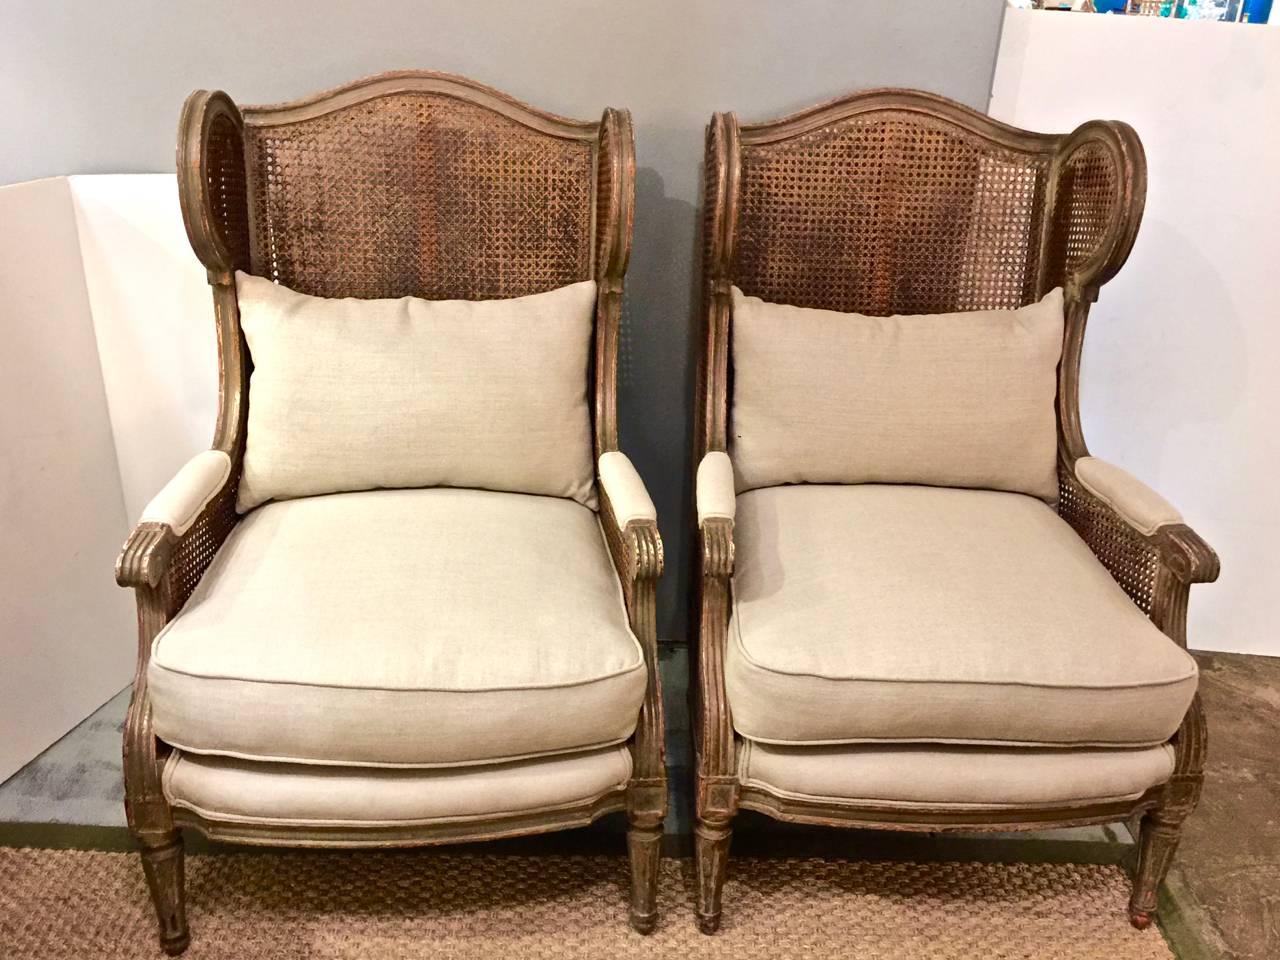 This is a rare pair of early 20th century double caned Louis XVI-style wing chairs that retain their original grey-green paint and which have acquired just the right degree of patina, The cane is in good condition without any noticeable damage.